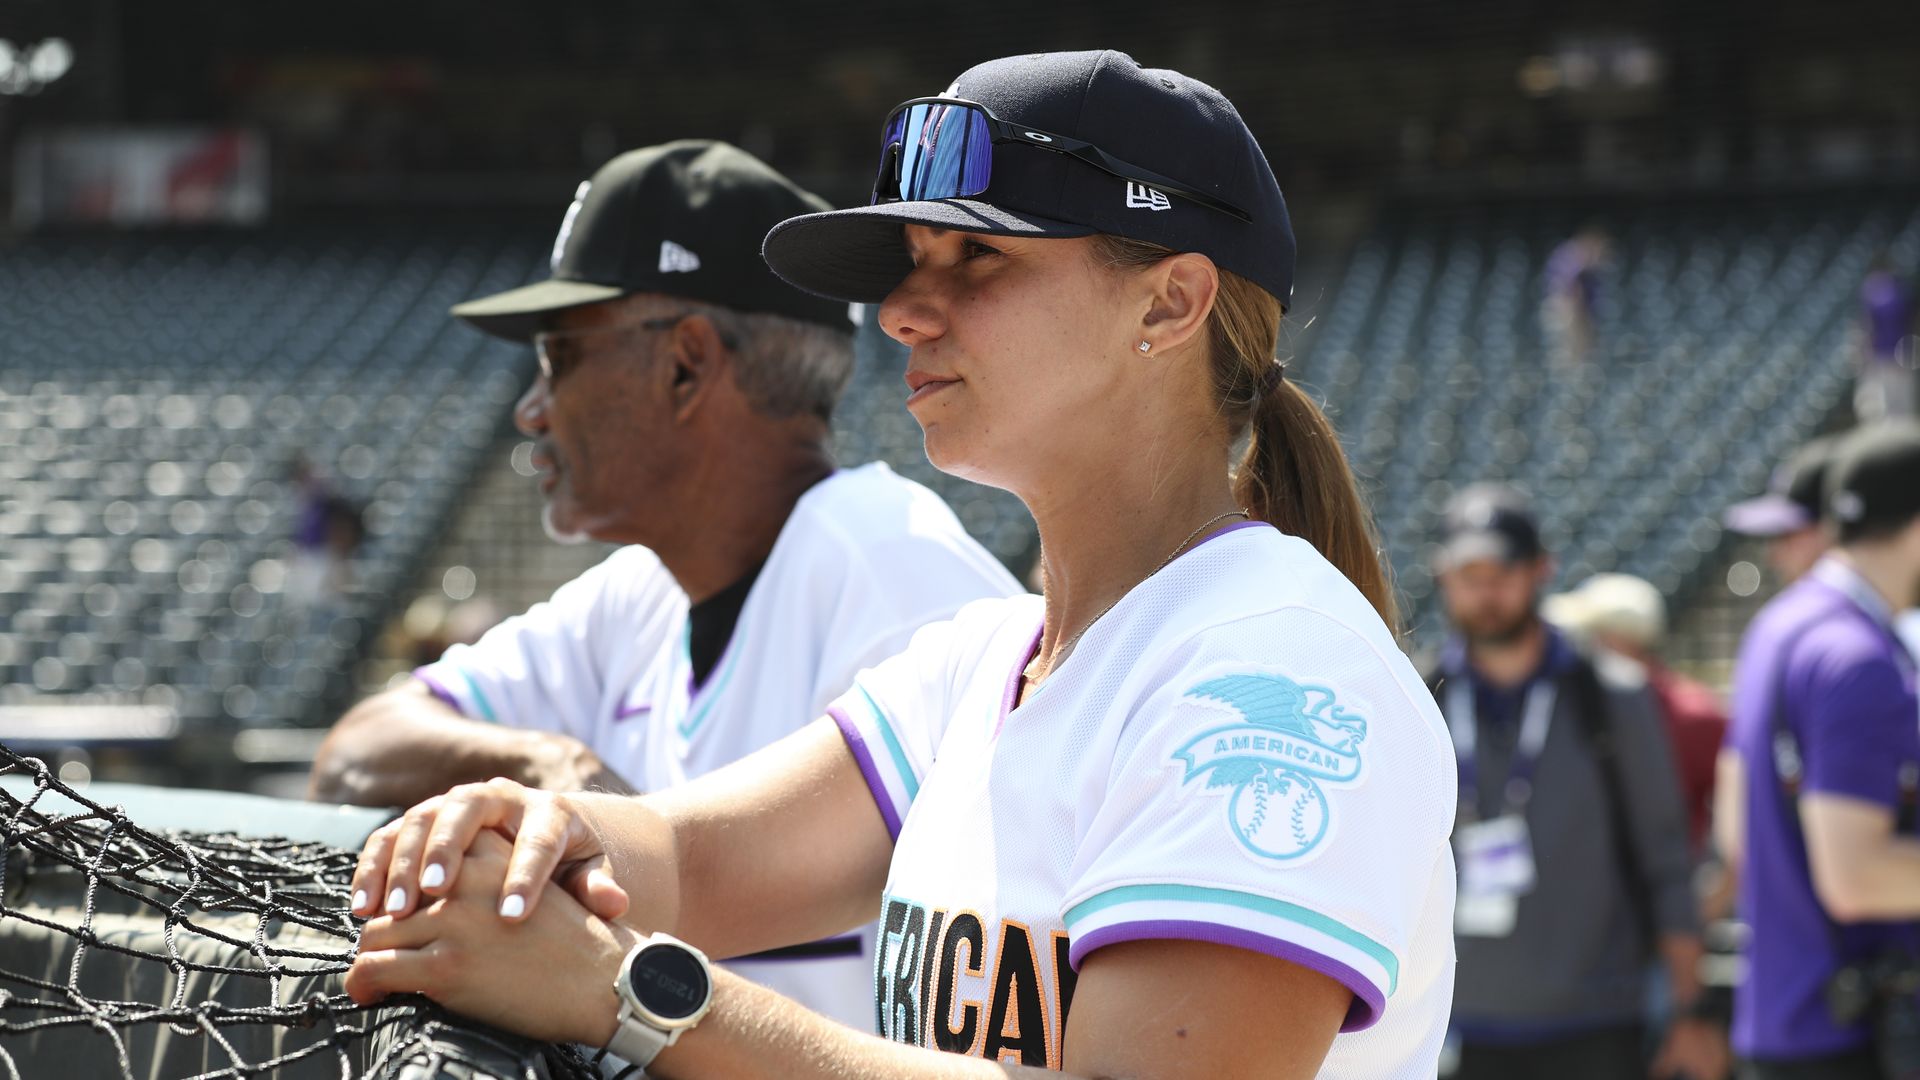  Bench Coach Jerry Manuel #11 and Hitting Coach Rachel Balkovec #9 of the American League Team look on during the 2021 Sirius XM Futures Game.